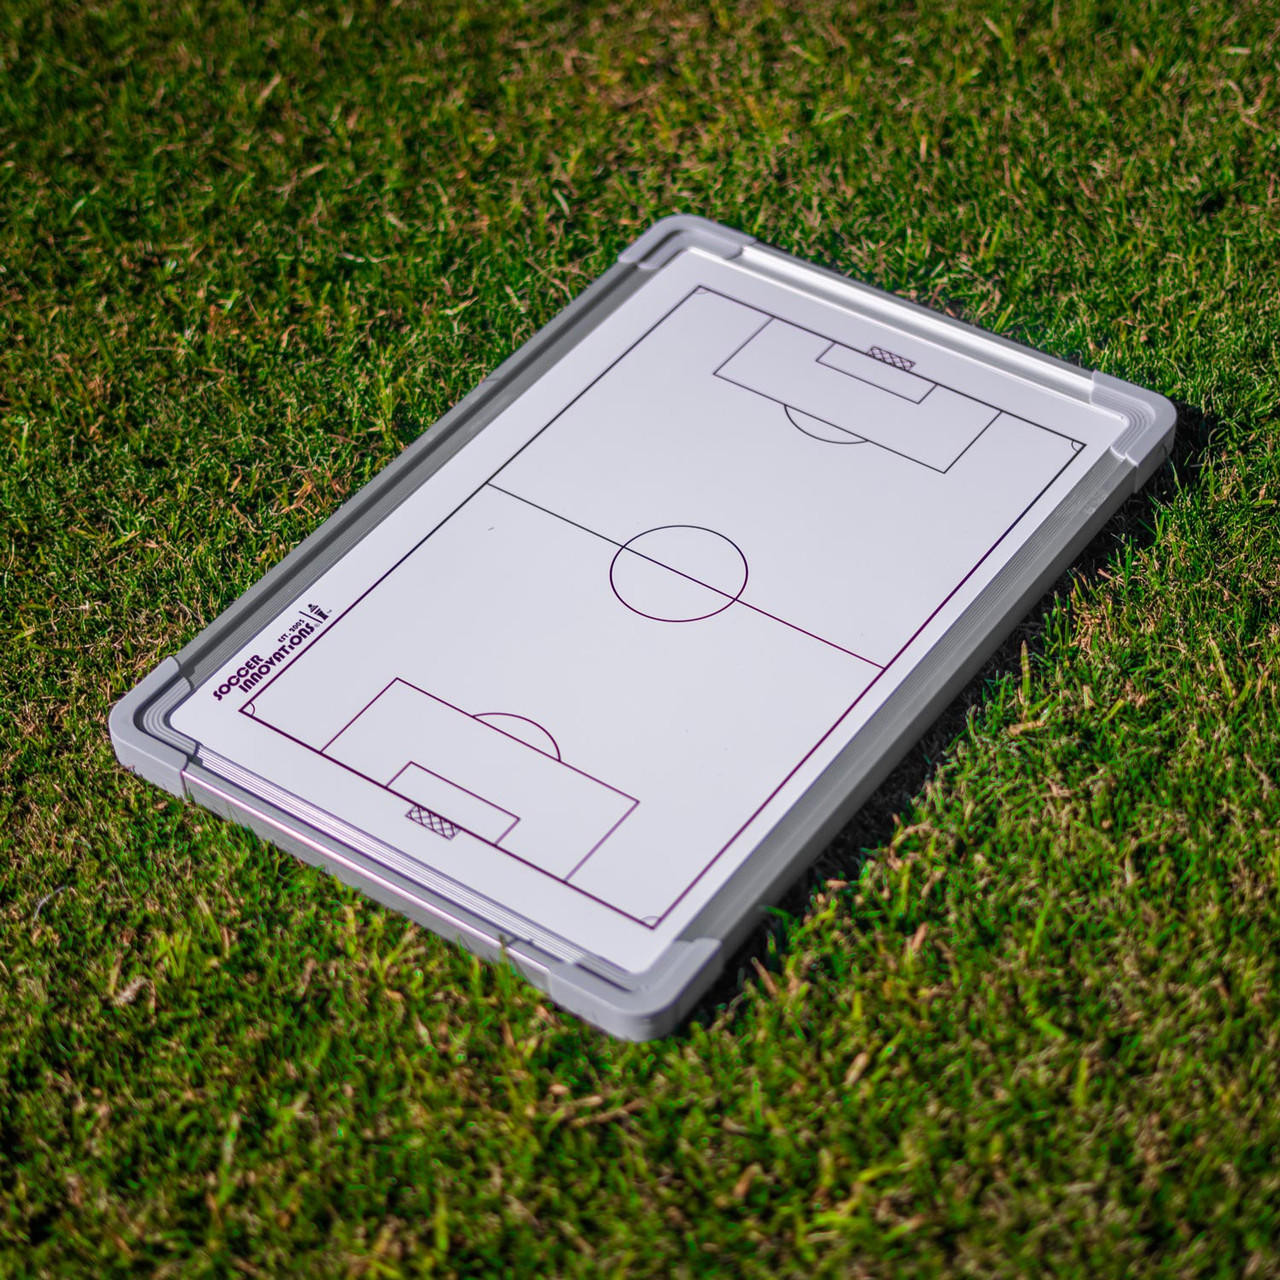  FOCCTS Magnetic Soccer Coaching Board, Football Coaching Board  Coaches Clipboard Tactical with 26 Magnets, Dry Erase Marker, Eraser,  Foldable and Portable Soccer Tactics Board : Sports & Outdoors